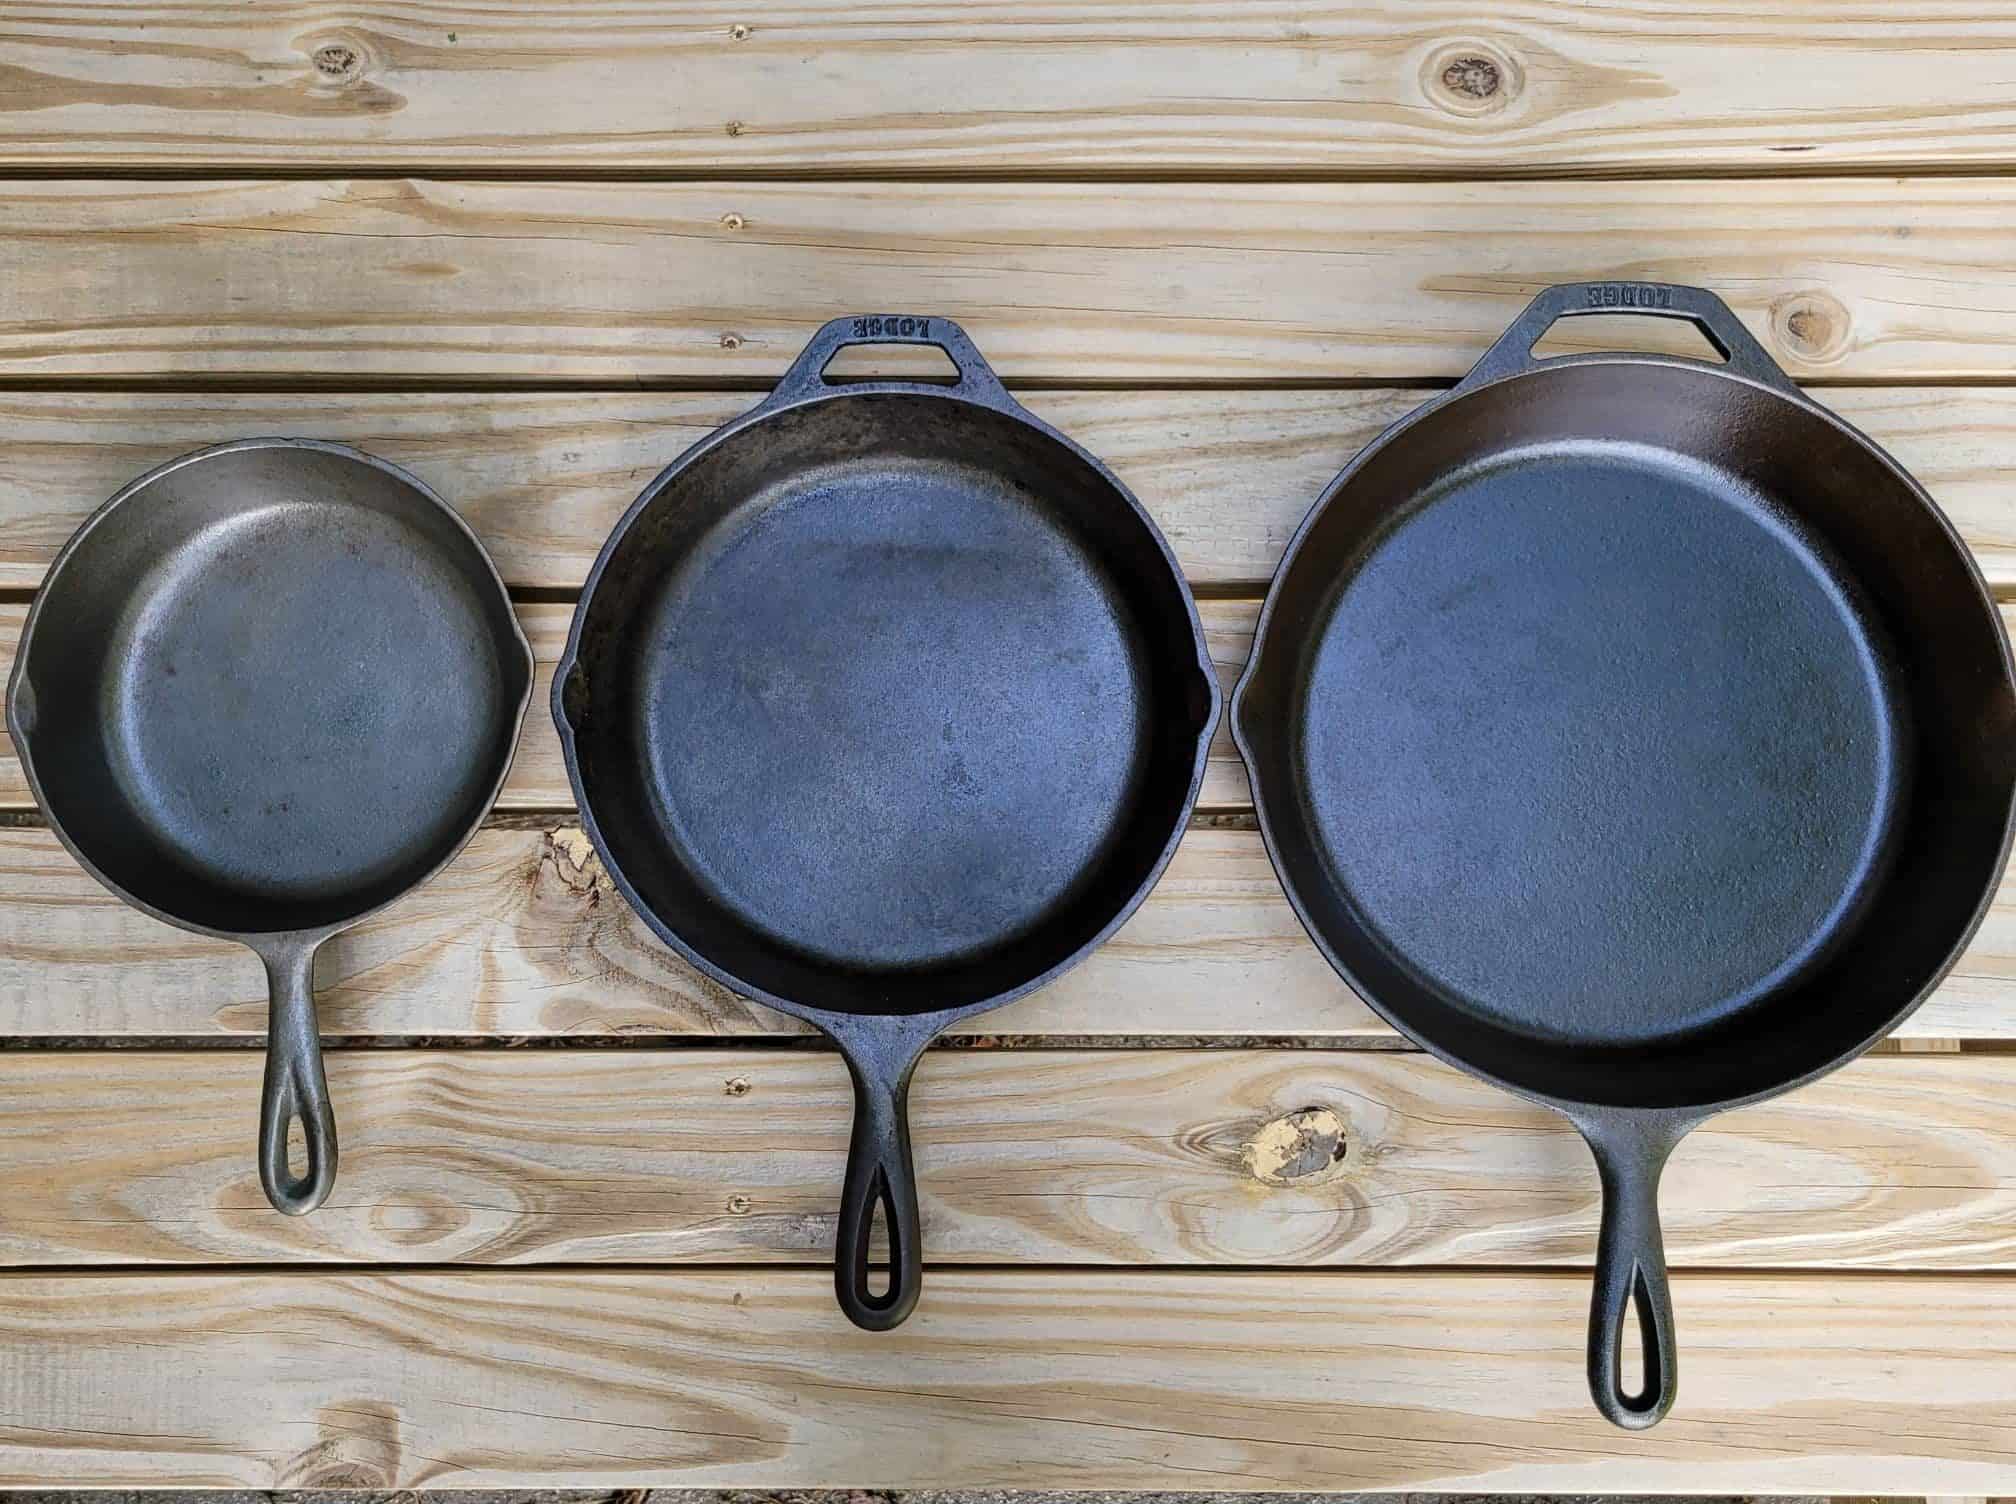 https://campfiresandcastiron.com/wp-content/uploads/2021/08/Unseasoned-Partially-and-Fully-Seasoned-Skillets-rotated.jpg